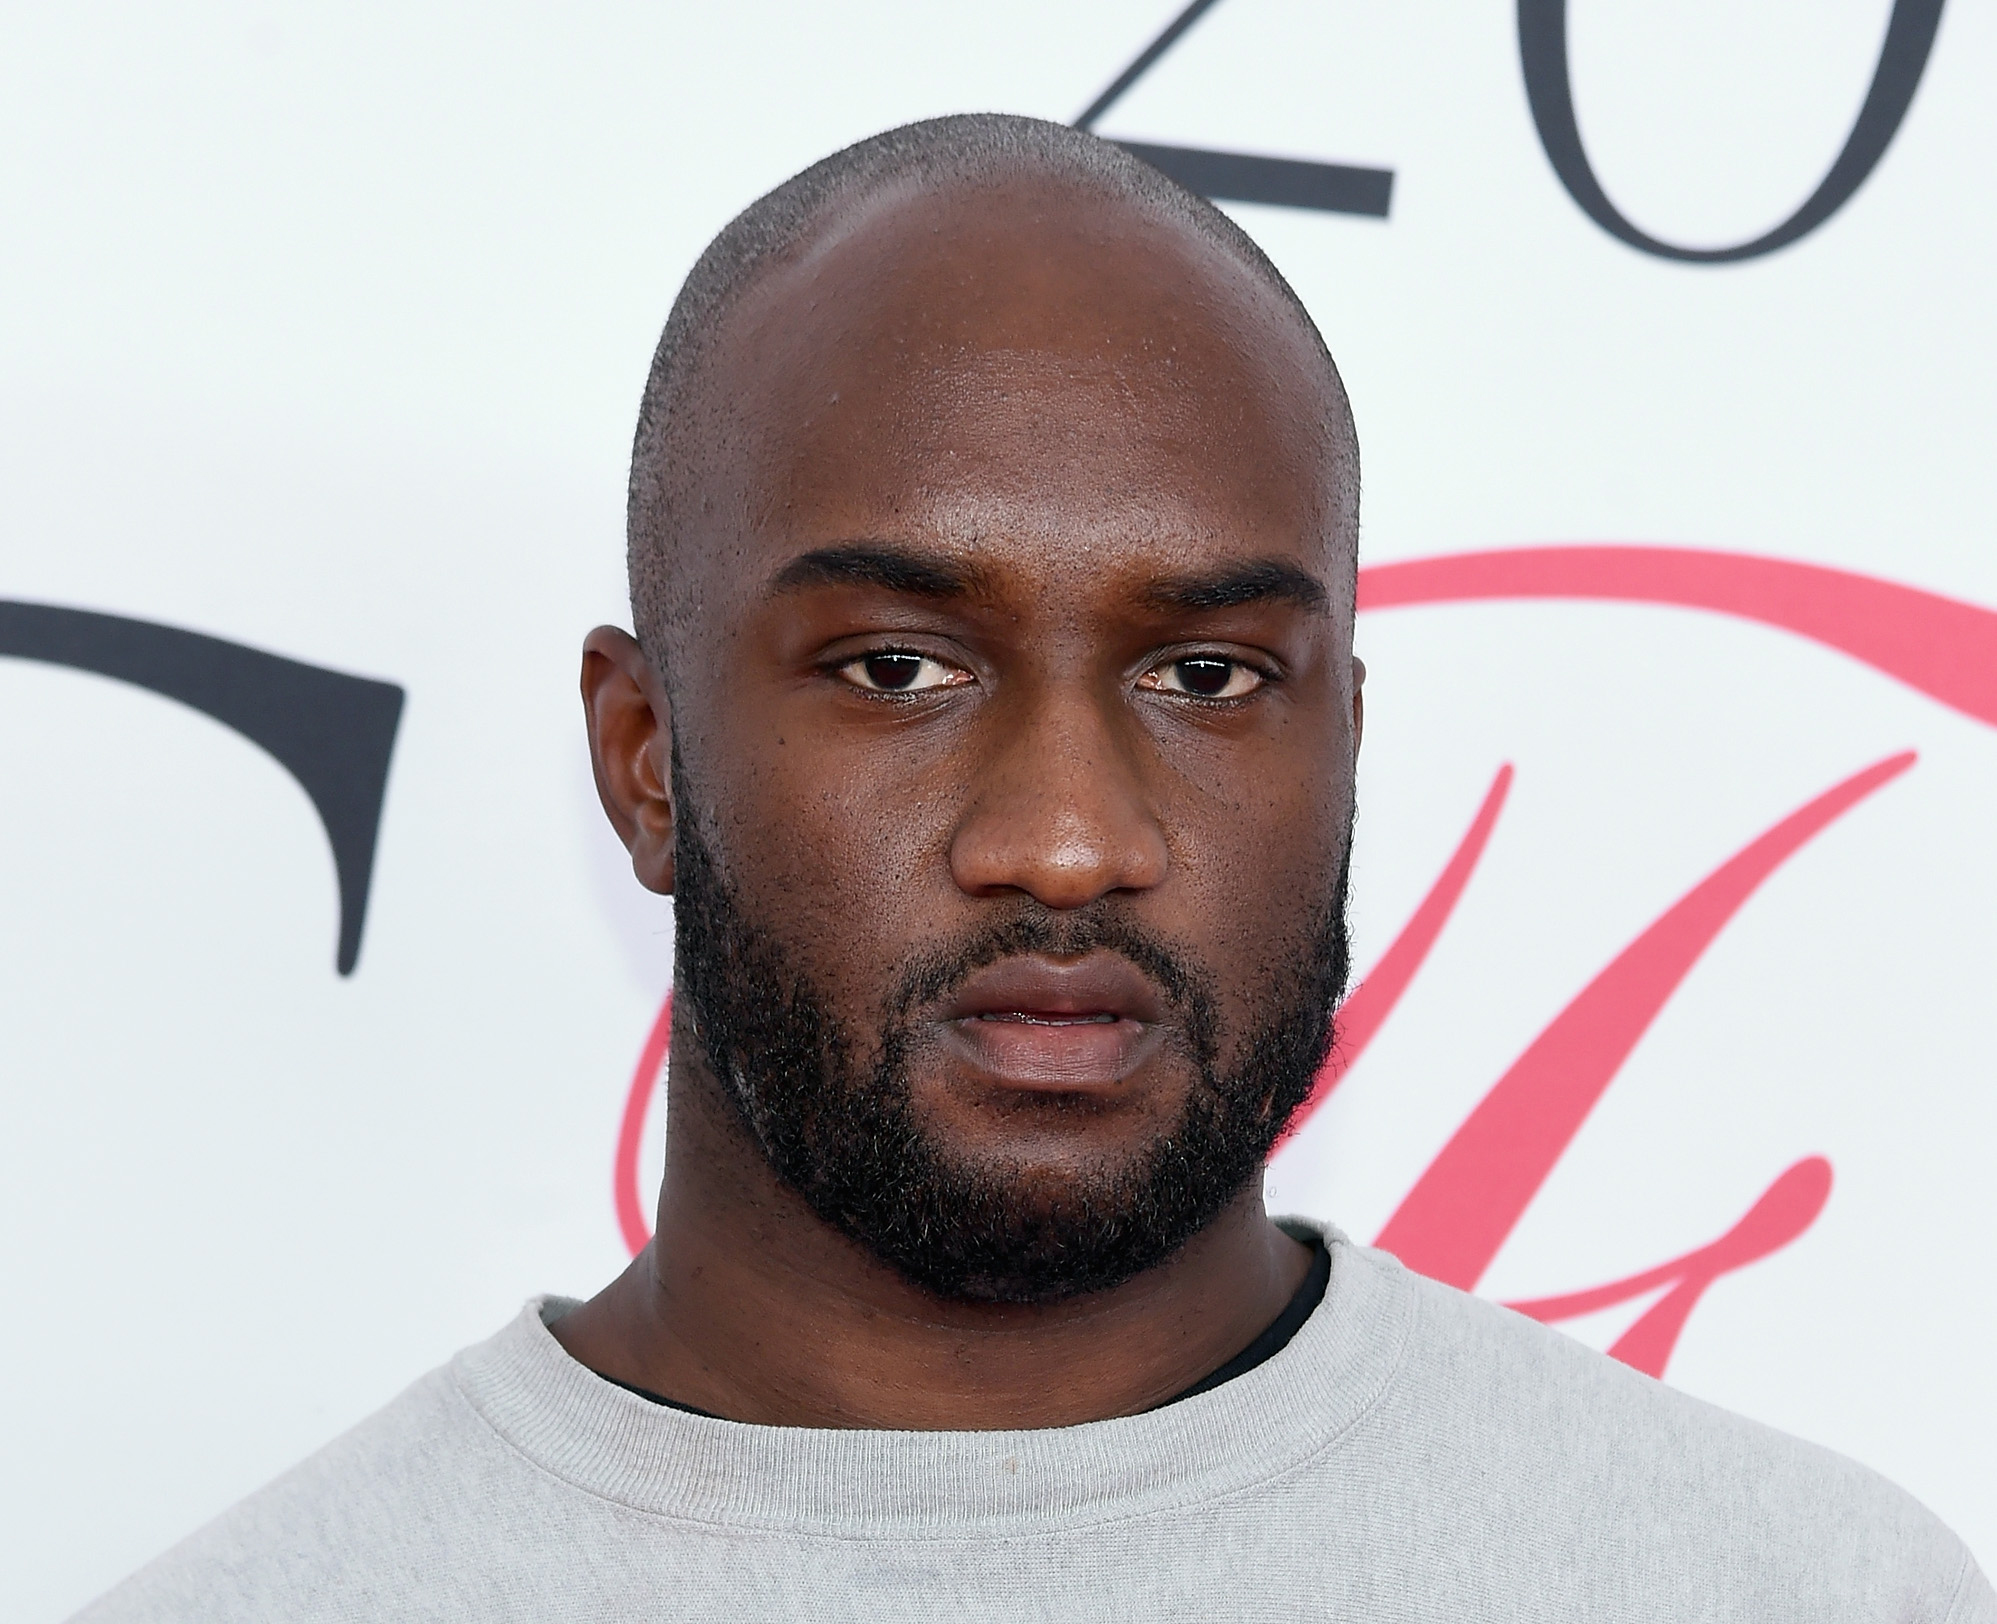 Virgil Abloh Apologized for Looting Comments and $50 Donation